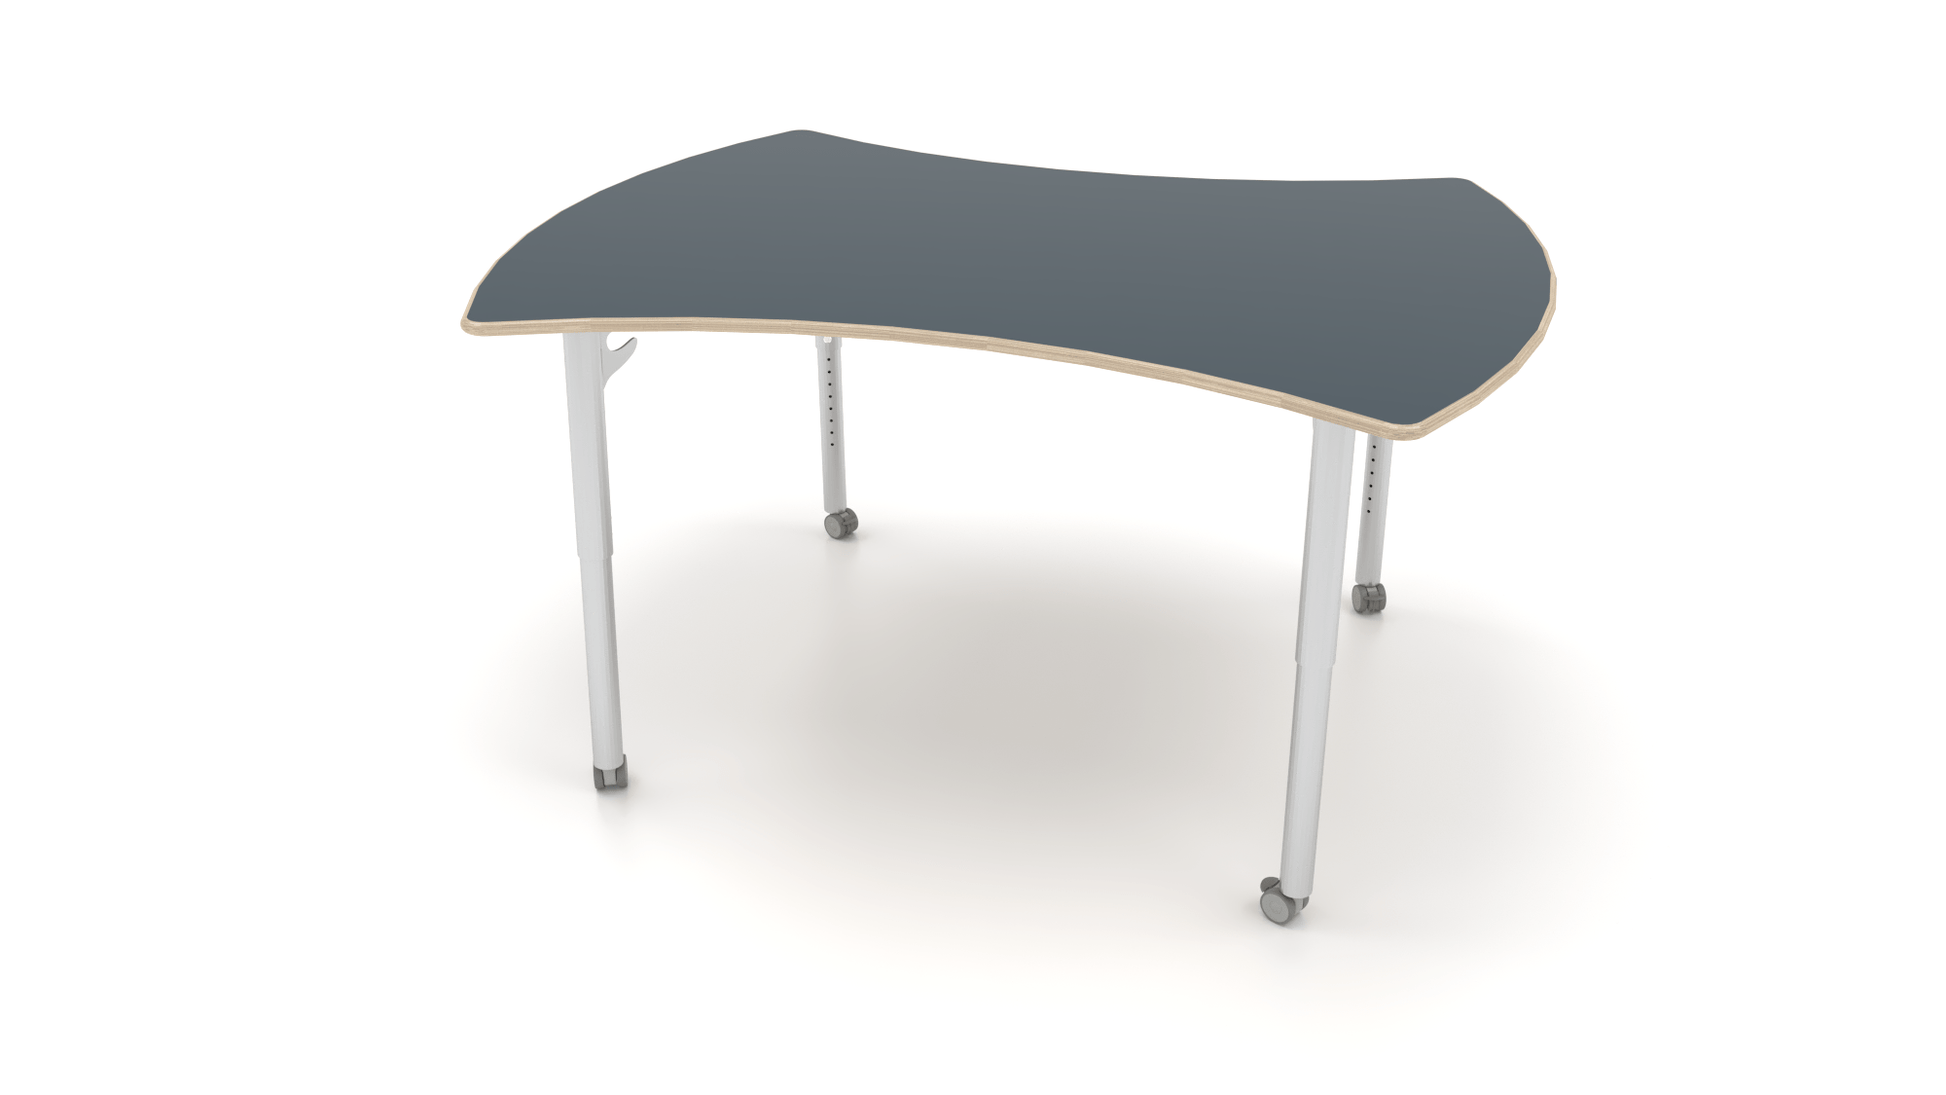 CEF ESTO Table 60" x 52" High-Pressure Laminate on Baltic Birch Top and Adjustable Height Legs - SchoolOutlet